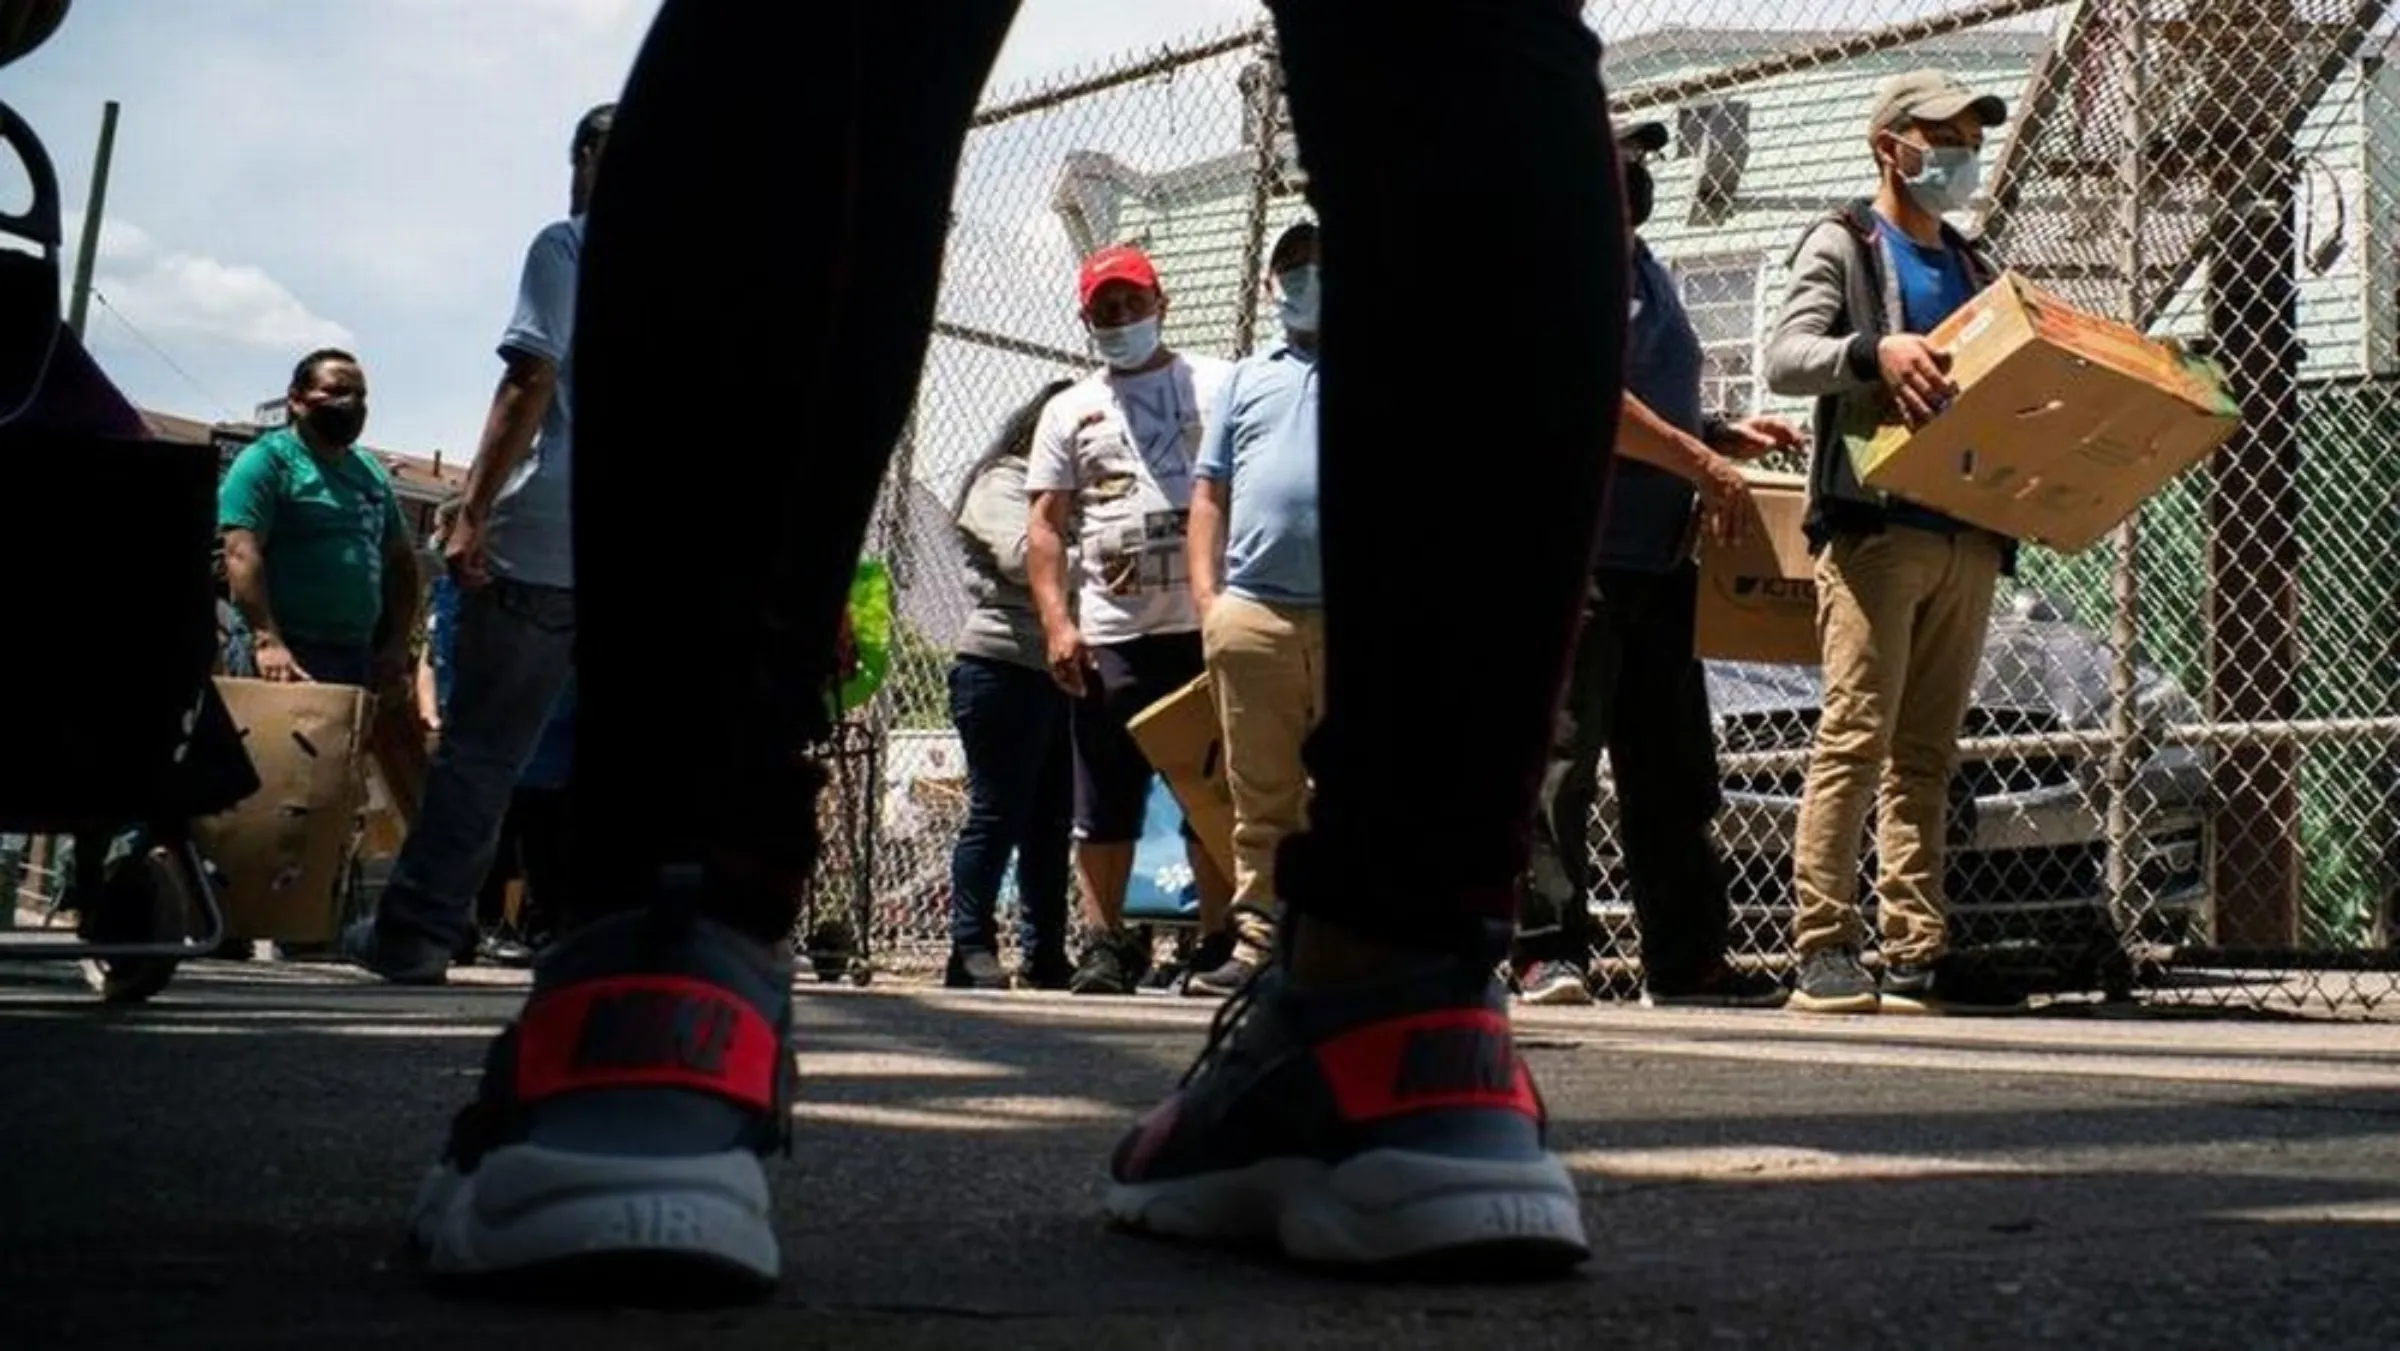 People queue during a food distribution during the outbreak of the coronavirus disease (COVID-19) in the Corona section of Queens, New York City, New York, U.S., May 16, 2020